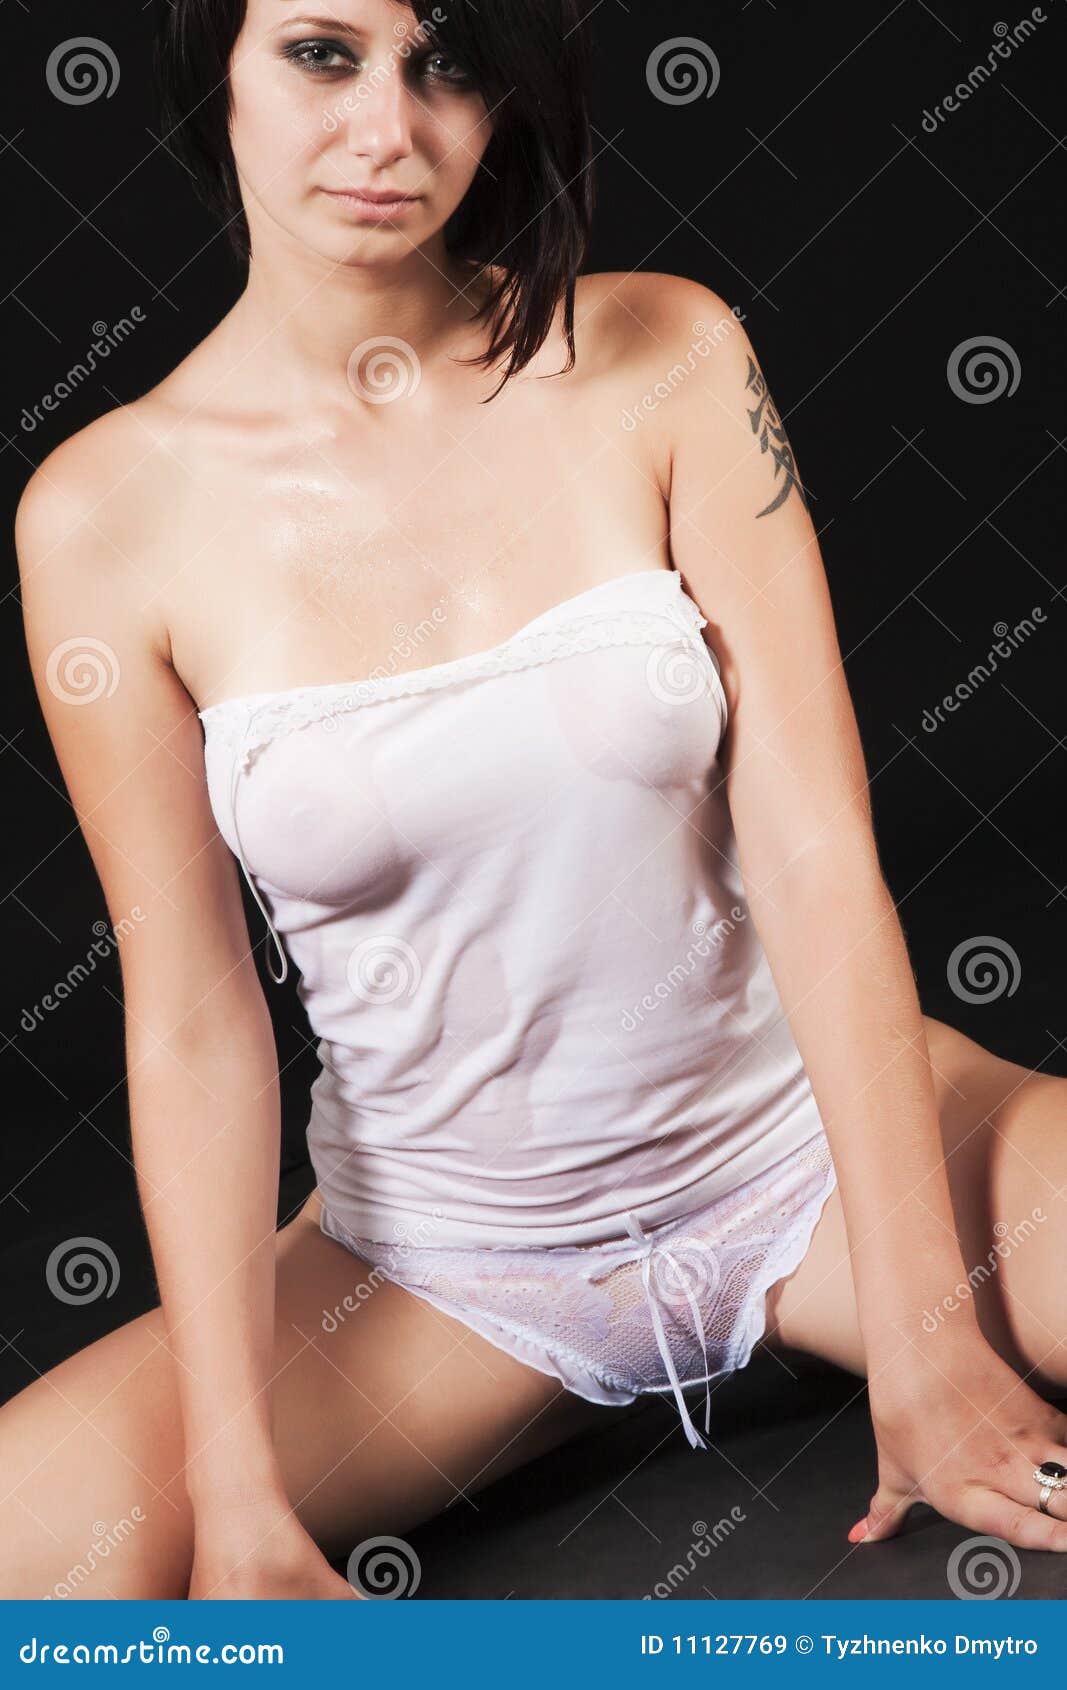 amy hall armstrong recommends wet tee shirt girls pic